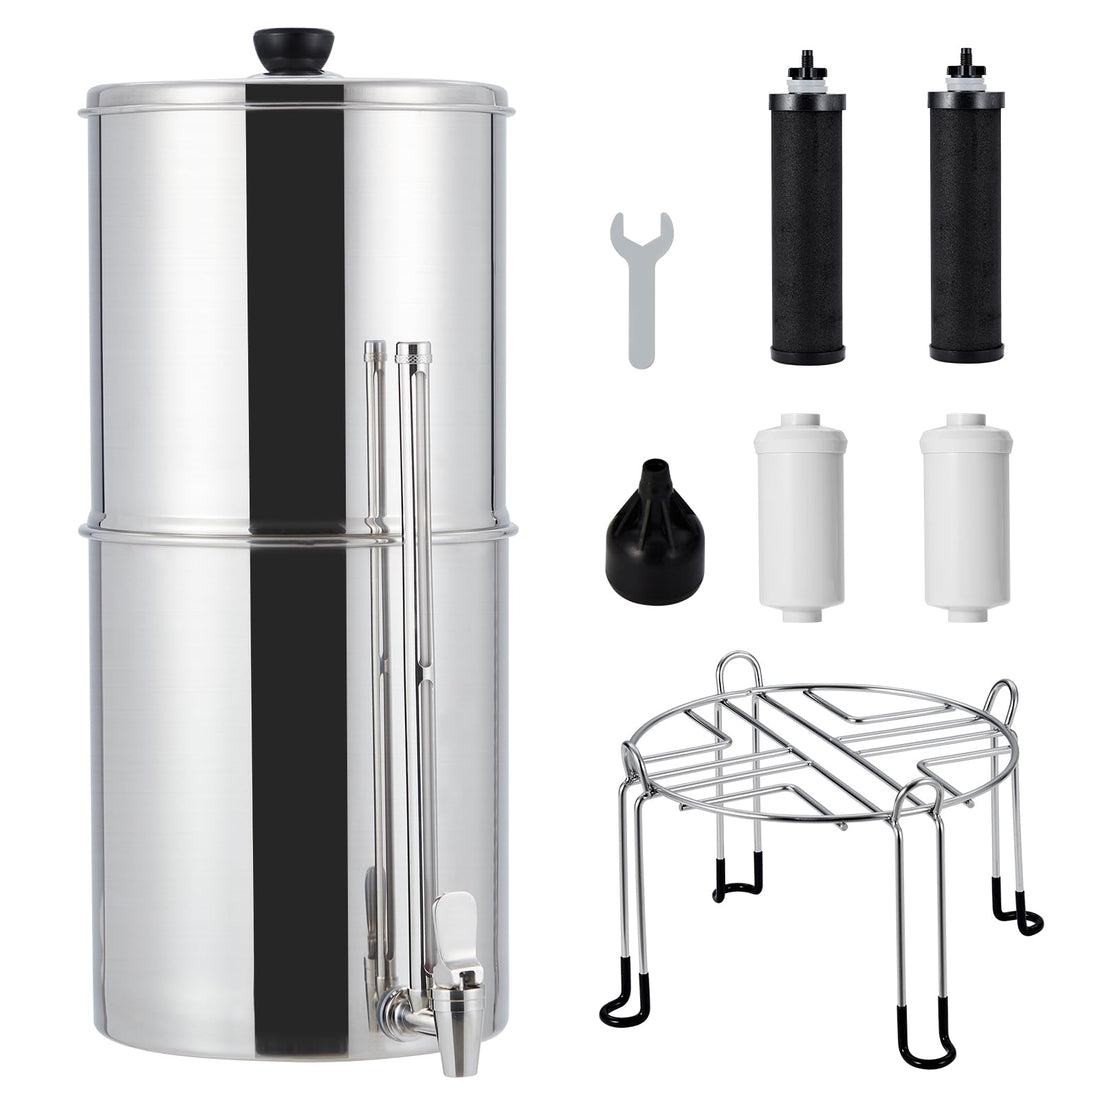 Gravity-fed Water Filter System 2.25G Stainless-Steel Water Filter System for Home Camping